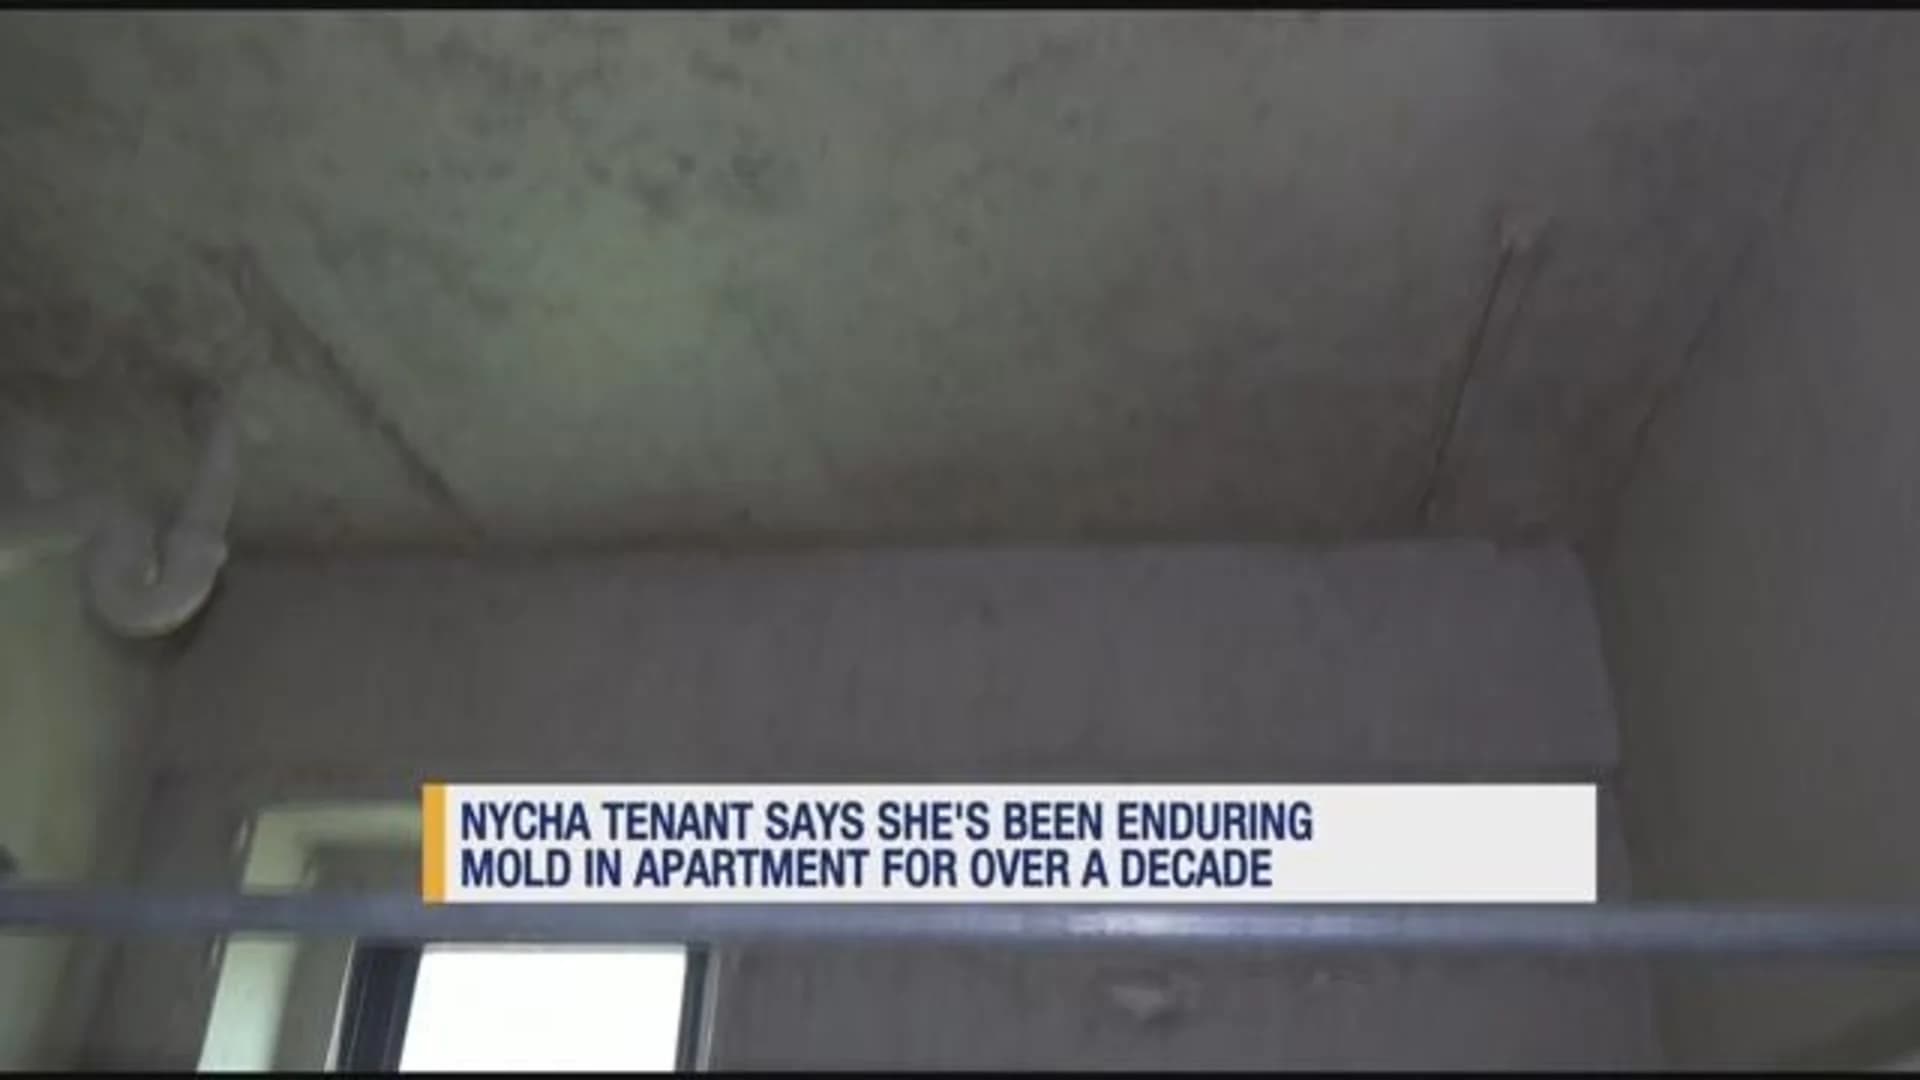 Tenant claims health issues stem from moldy apartment